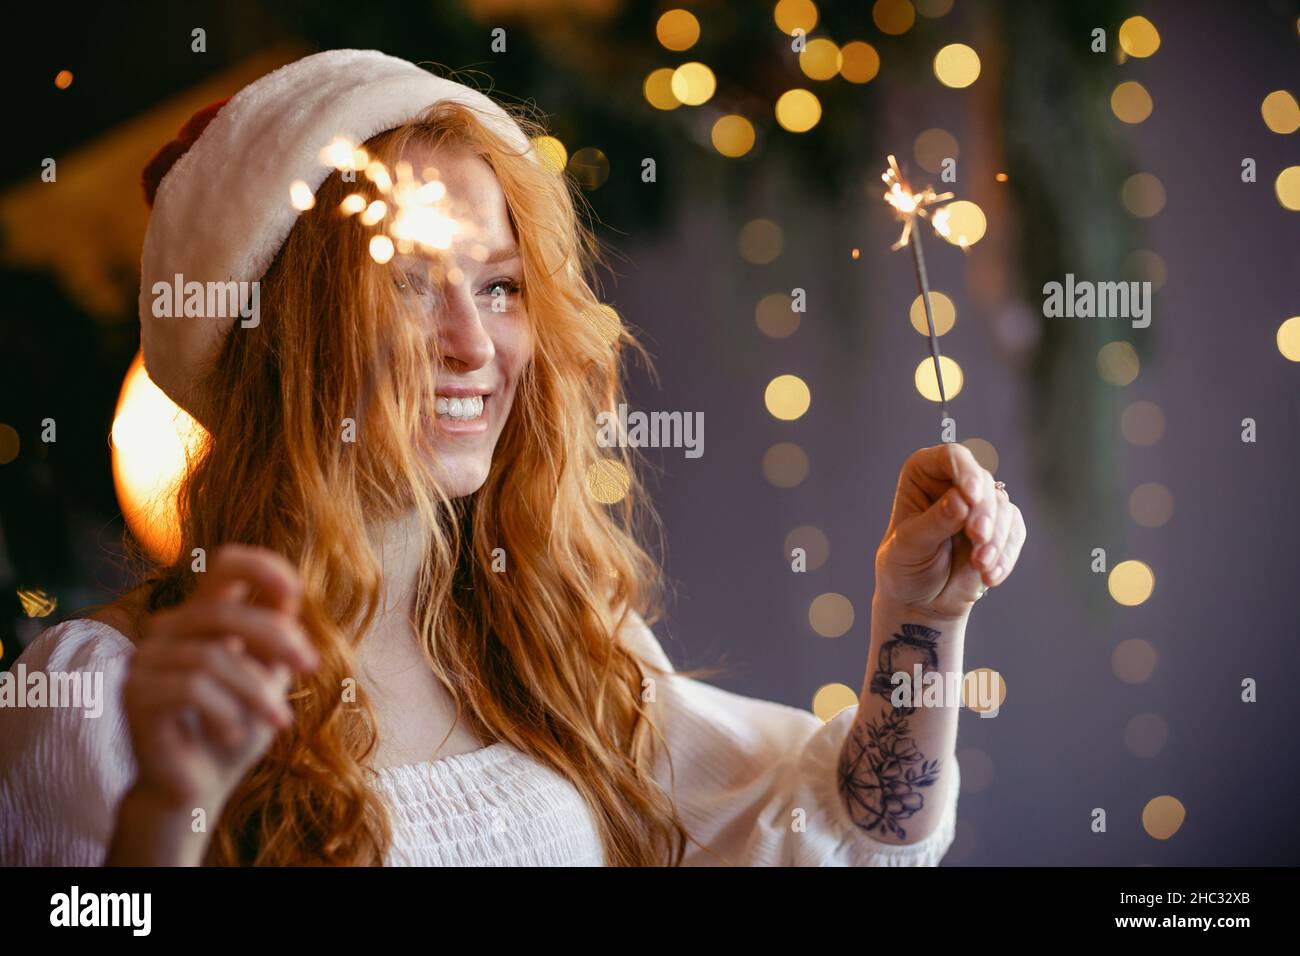 charming red-haired girl in a santa hat with sparklers in her hands smiling at the camera. Stock Photo